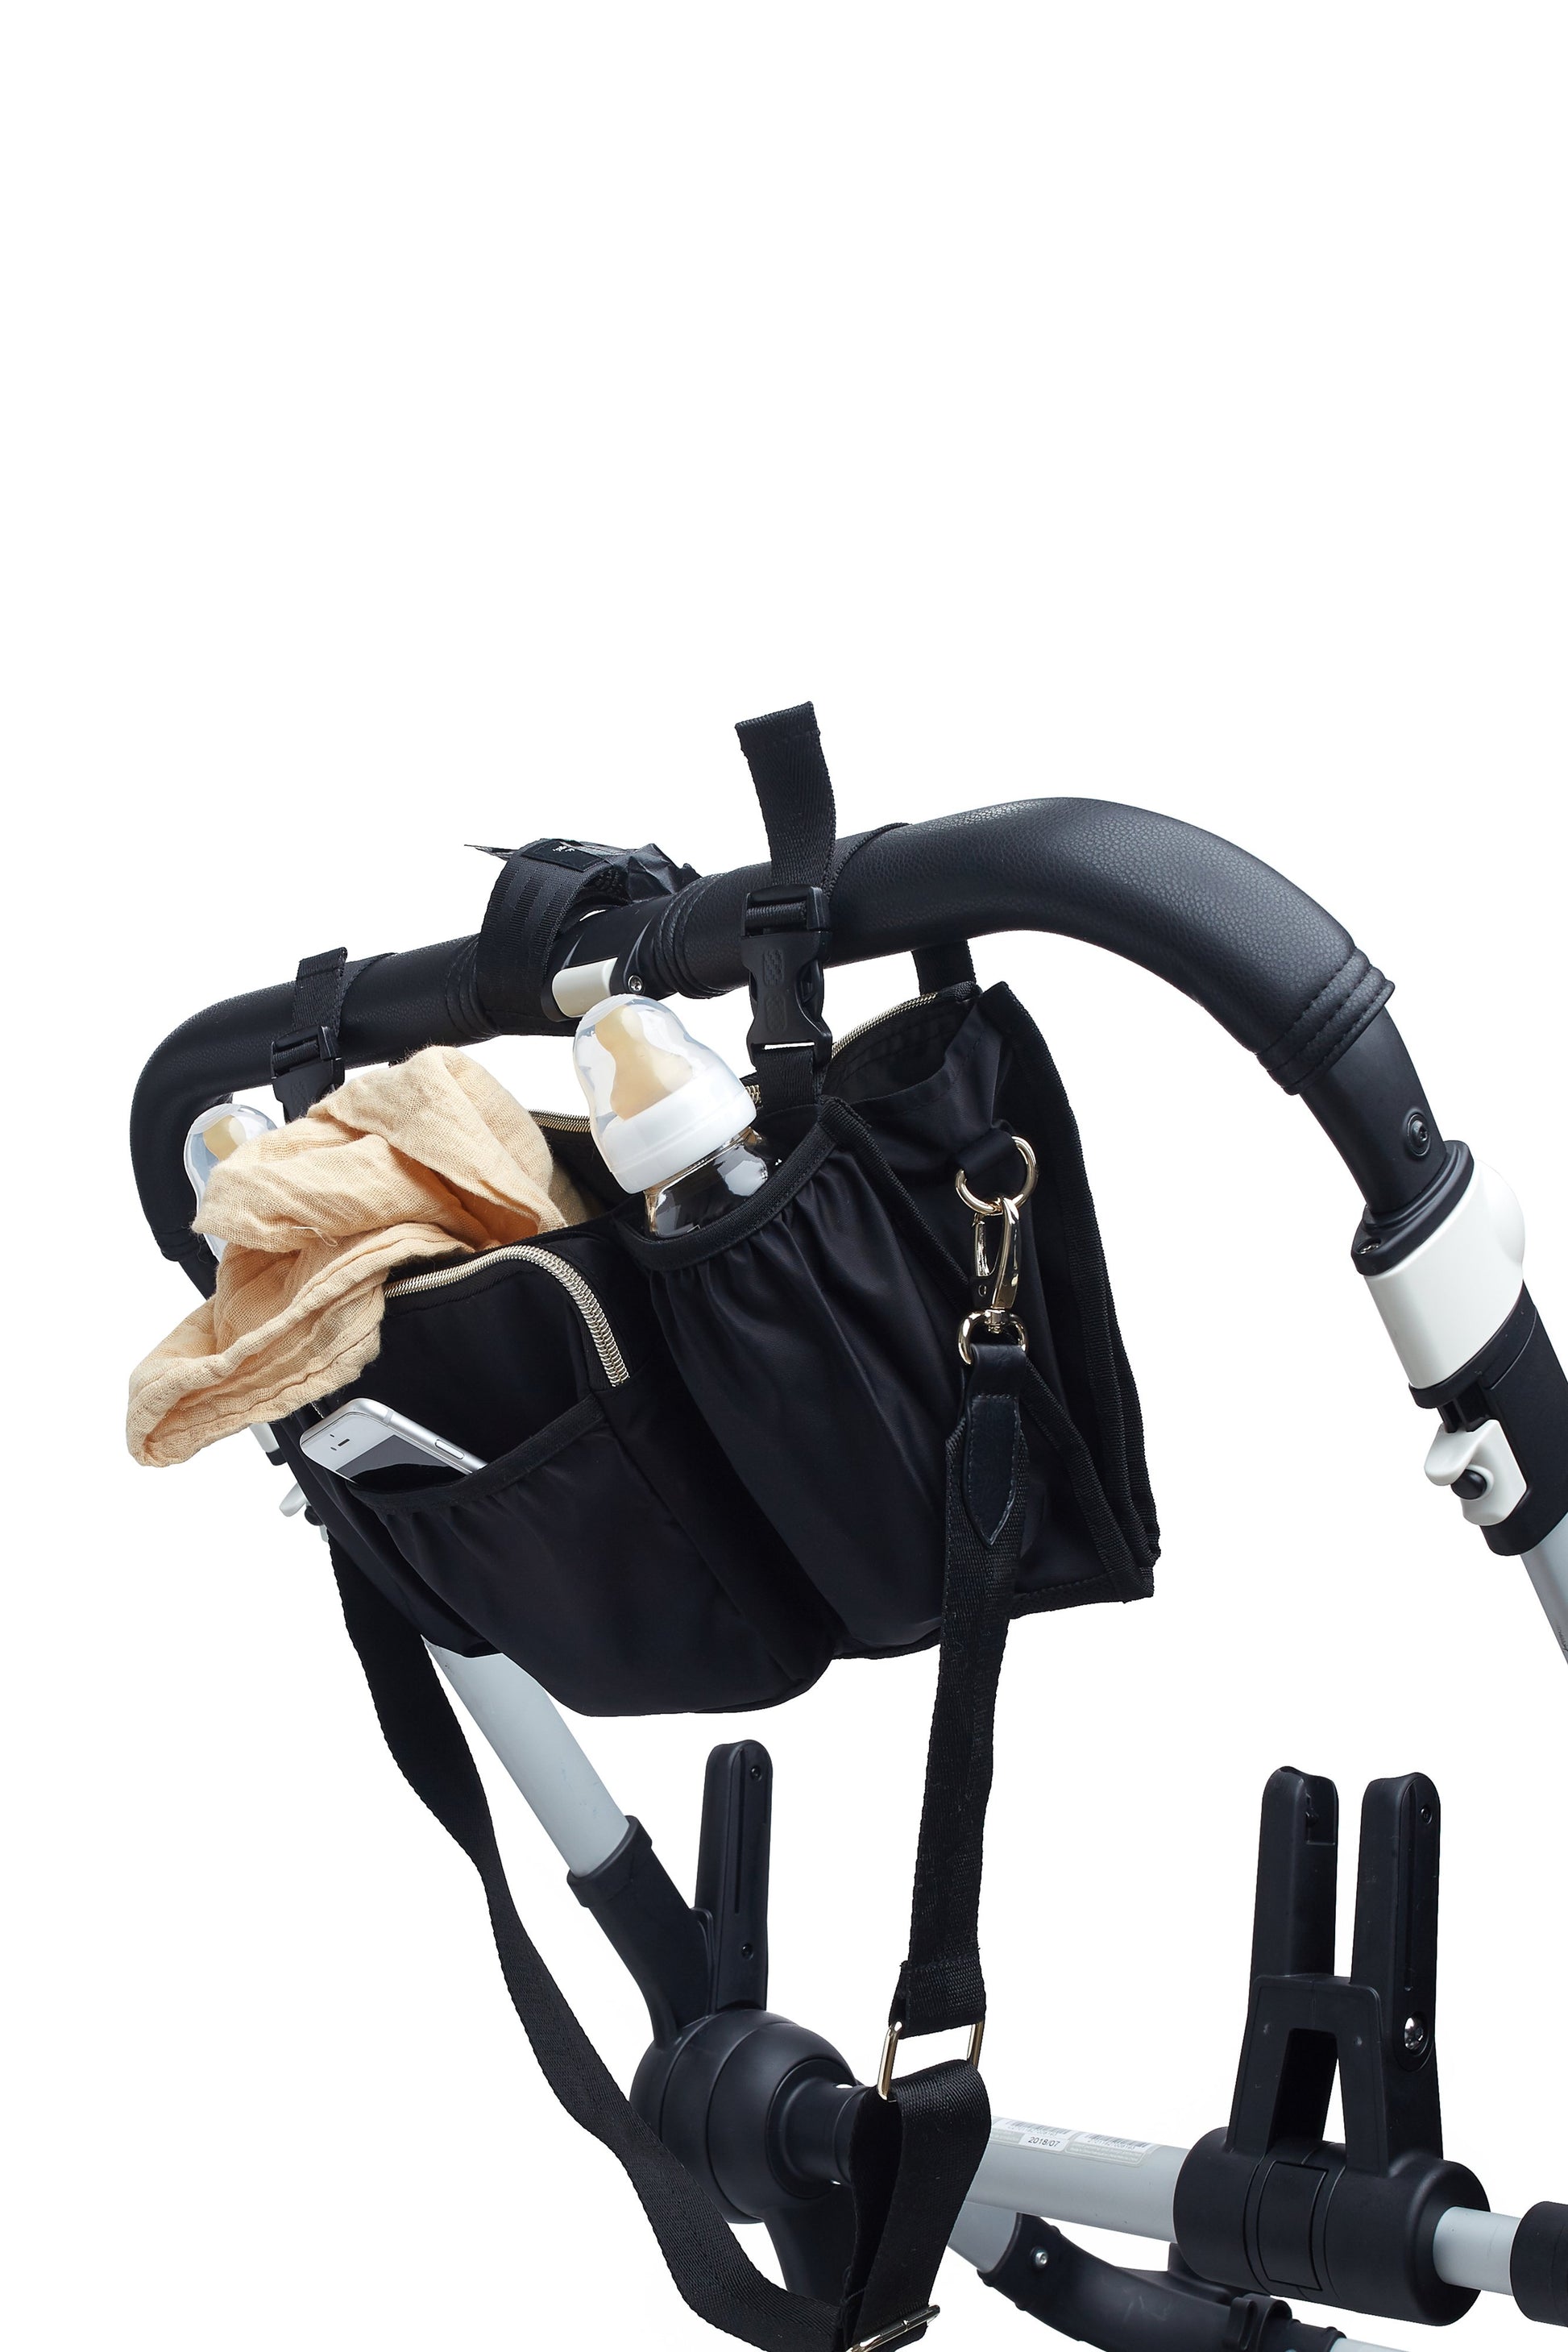 Stroller Caddy Black Side Strapped on Stroller Filled with Bottle Blanket Phone Necessities 